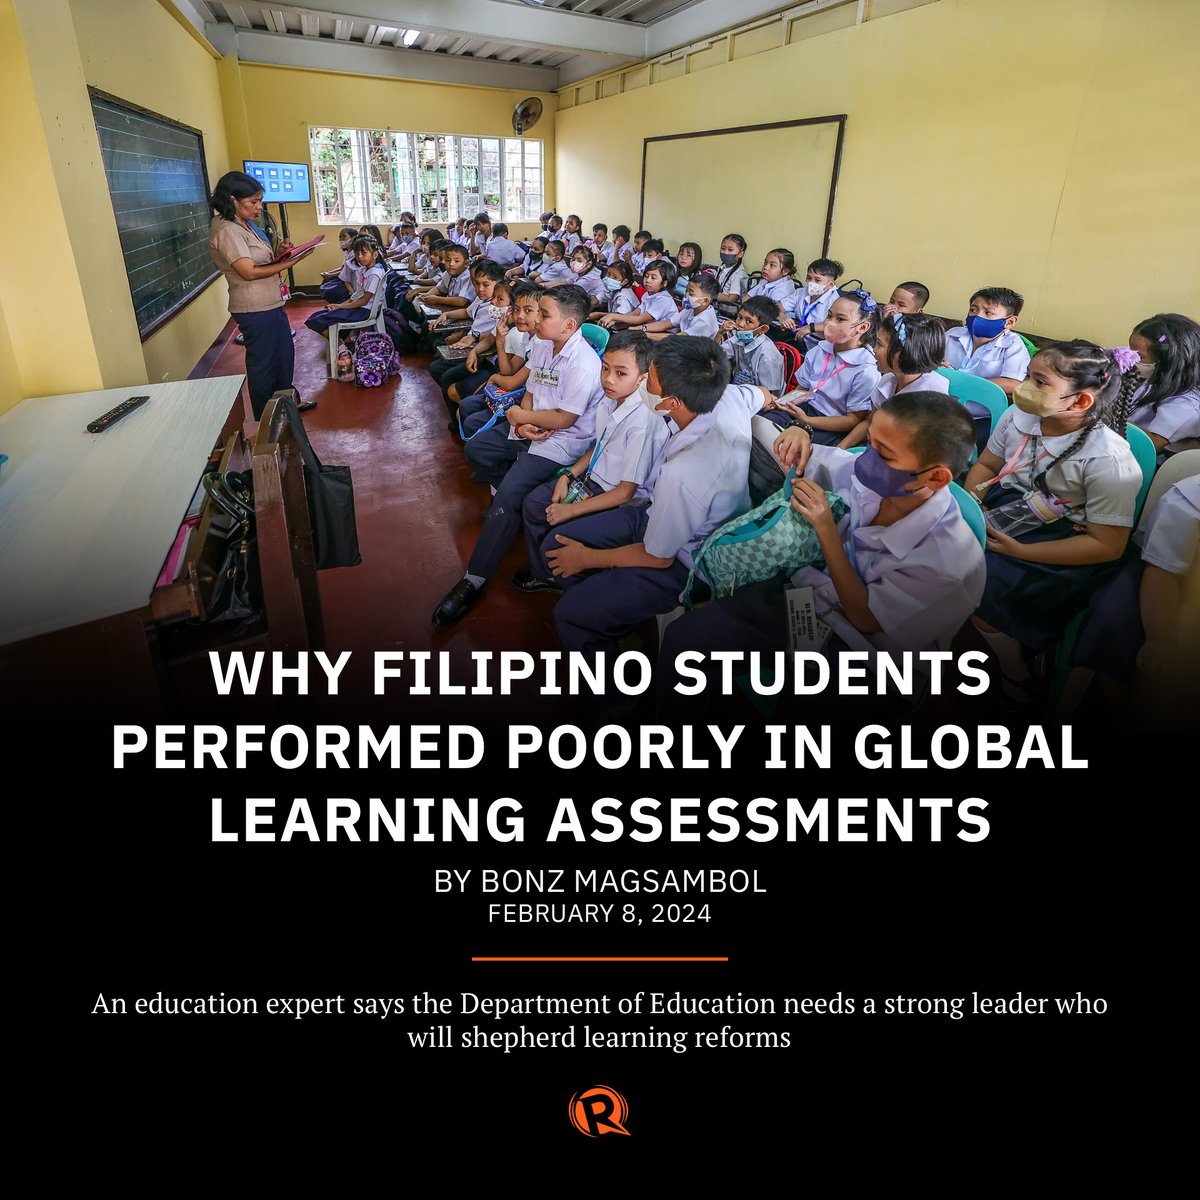 The Philippines, once again, ended up among the countries that produced the lowest proficiency for 15-year-old students in reading, math, and science, as indicated by the PISA rankings released in December 2023. What led to this result? trib.al/eytOXMS